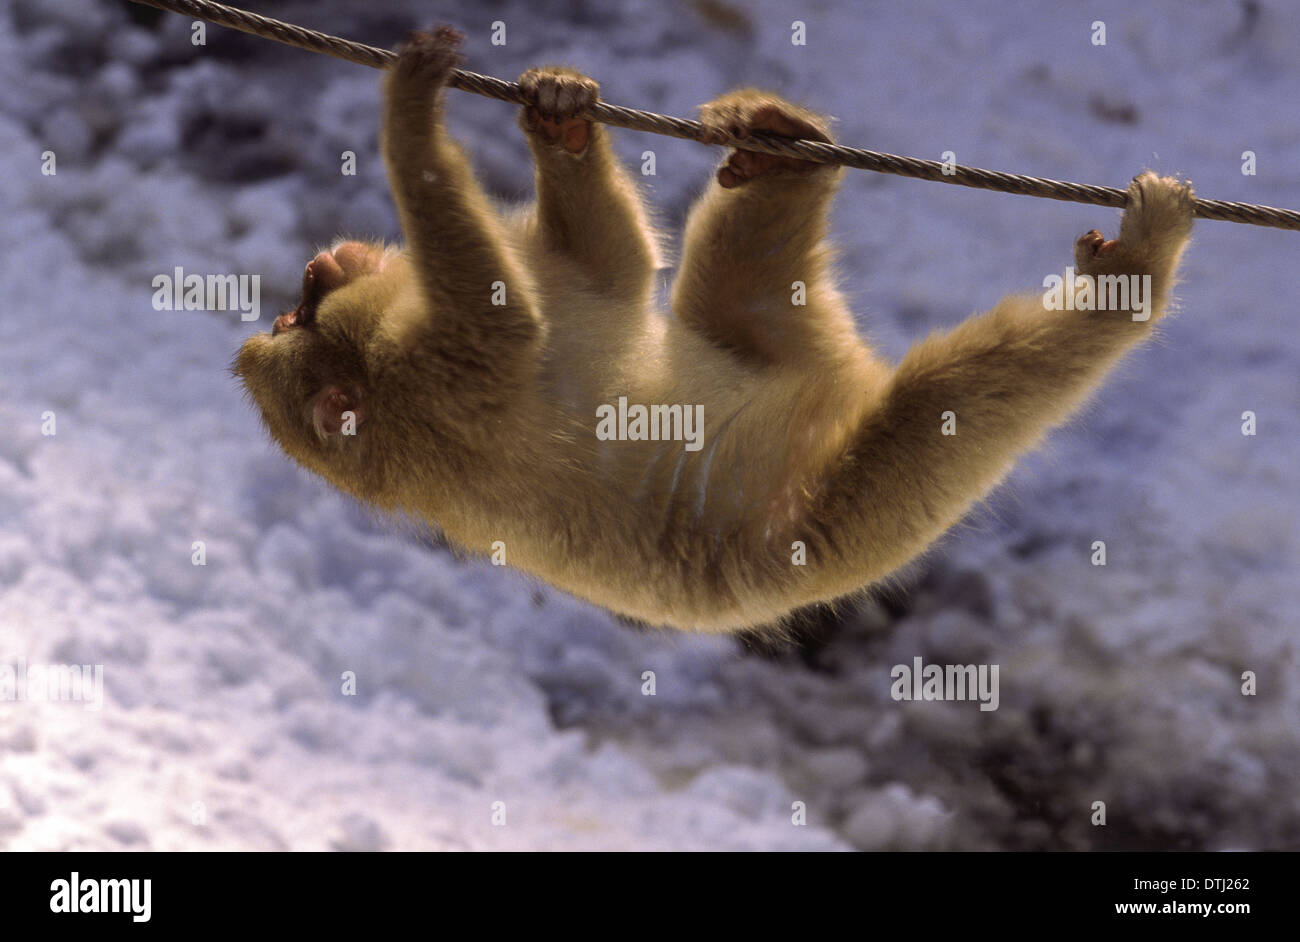 JAPANESE MACAQUE OR SNOW MONKEY  (Macaca fuscata) USING A WIRE CABLE AS A BRIDGE TO CROSS A VALLEY COVERED WITH SNOW Stock Photo